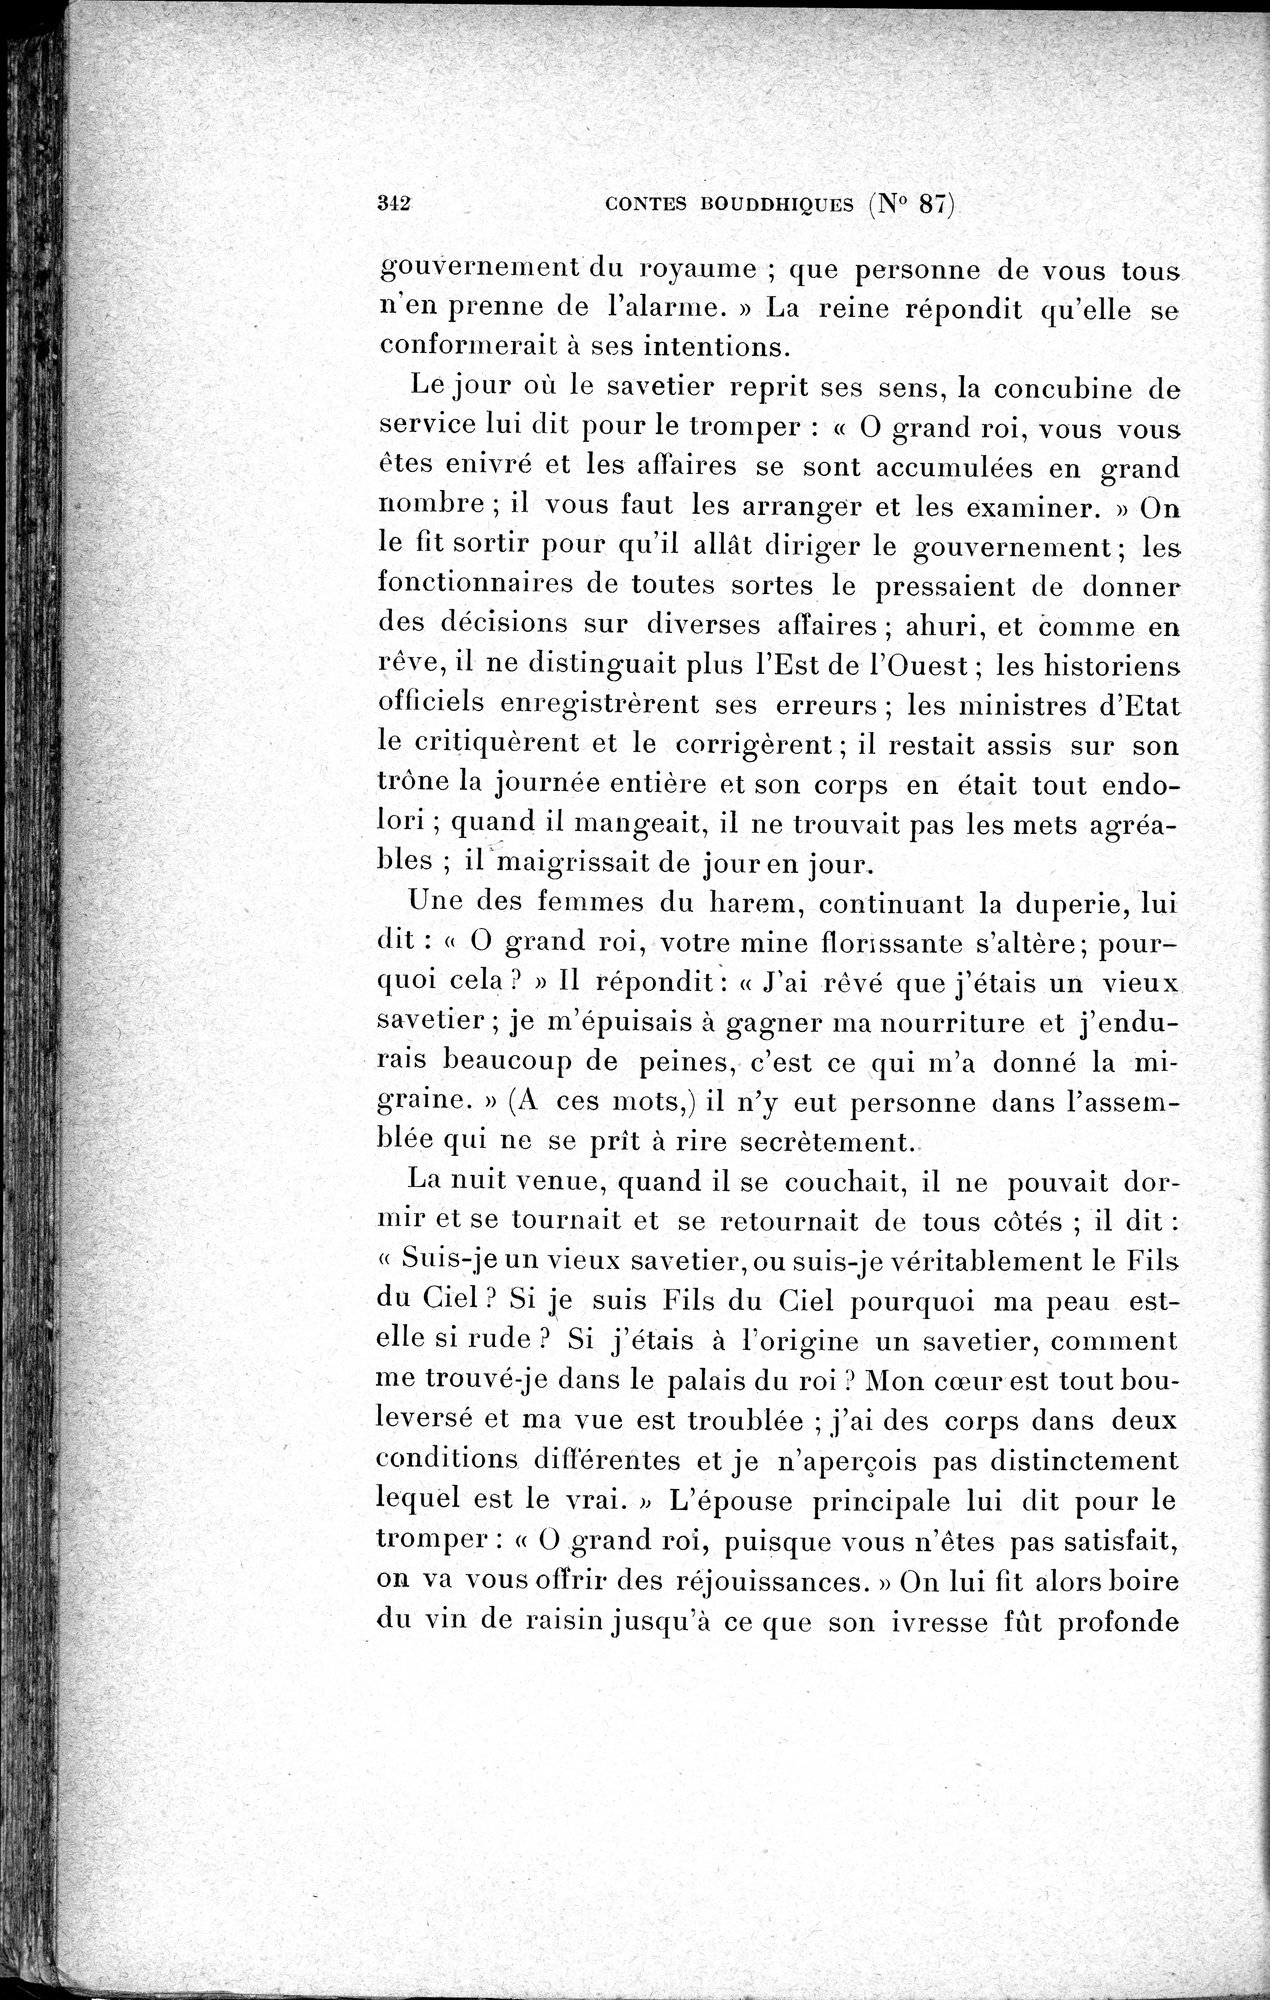 Cinq Cents Contes et Apologues : vol.1 / Page 376 (Grayscale High Resolution Image)